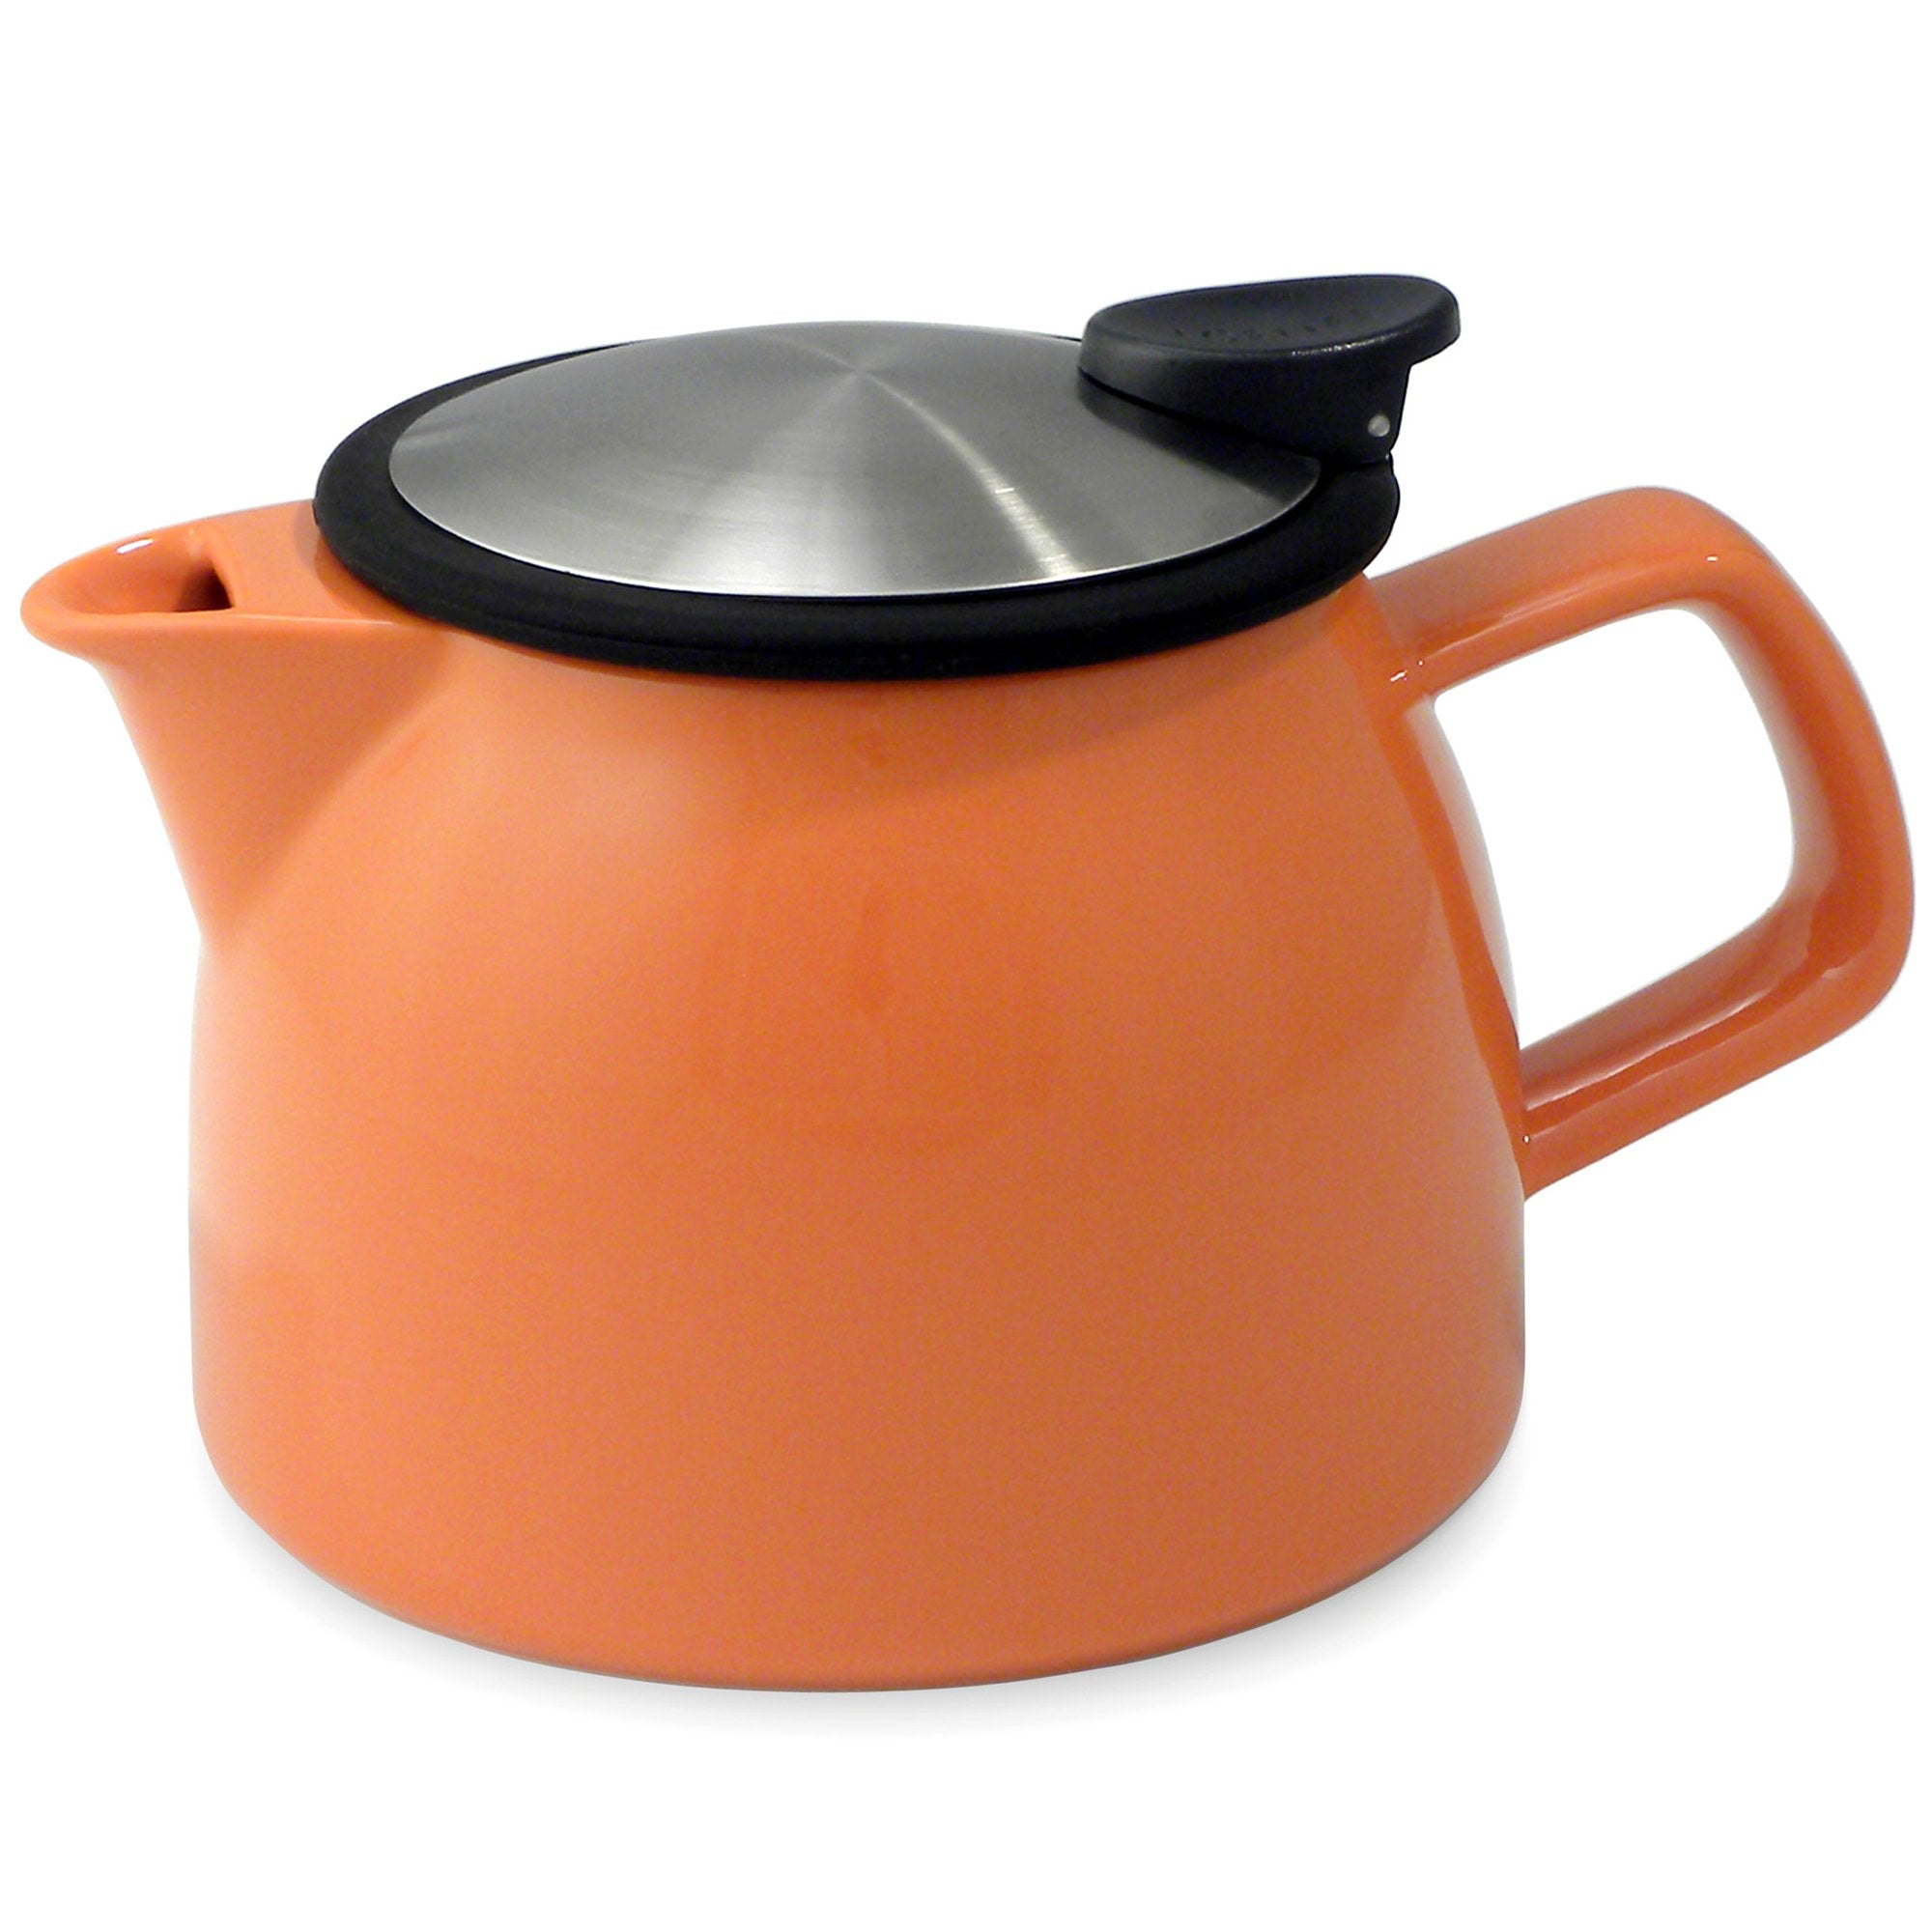 Tealula 16 oz bell-shaped Carrot Orange teapot with square handle and black and silver detachable push-on-lid